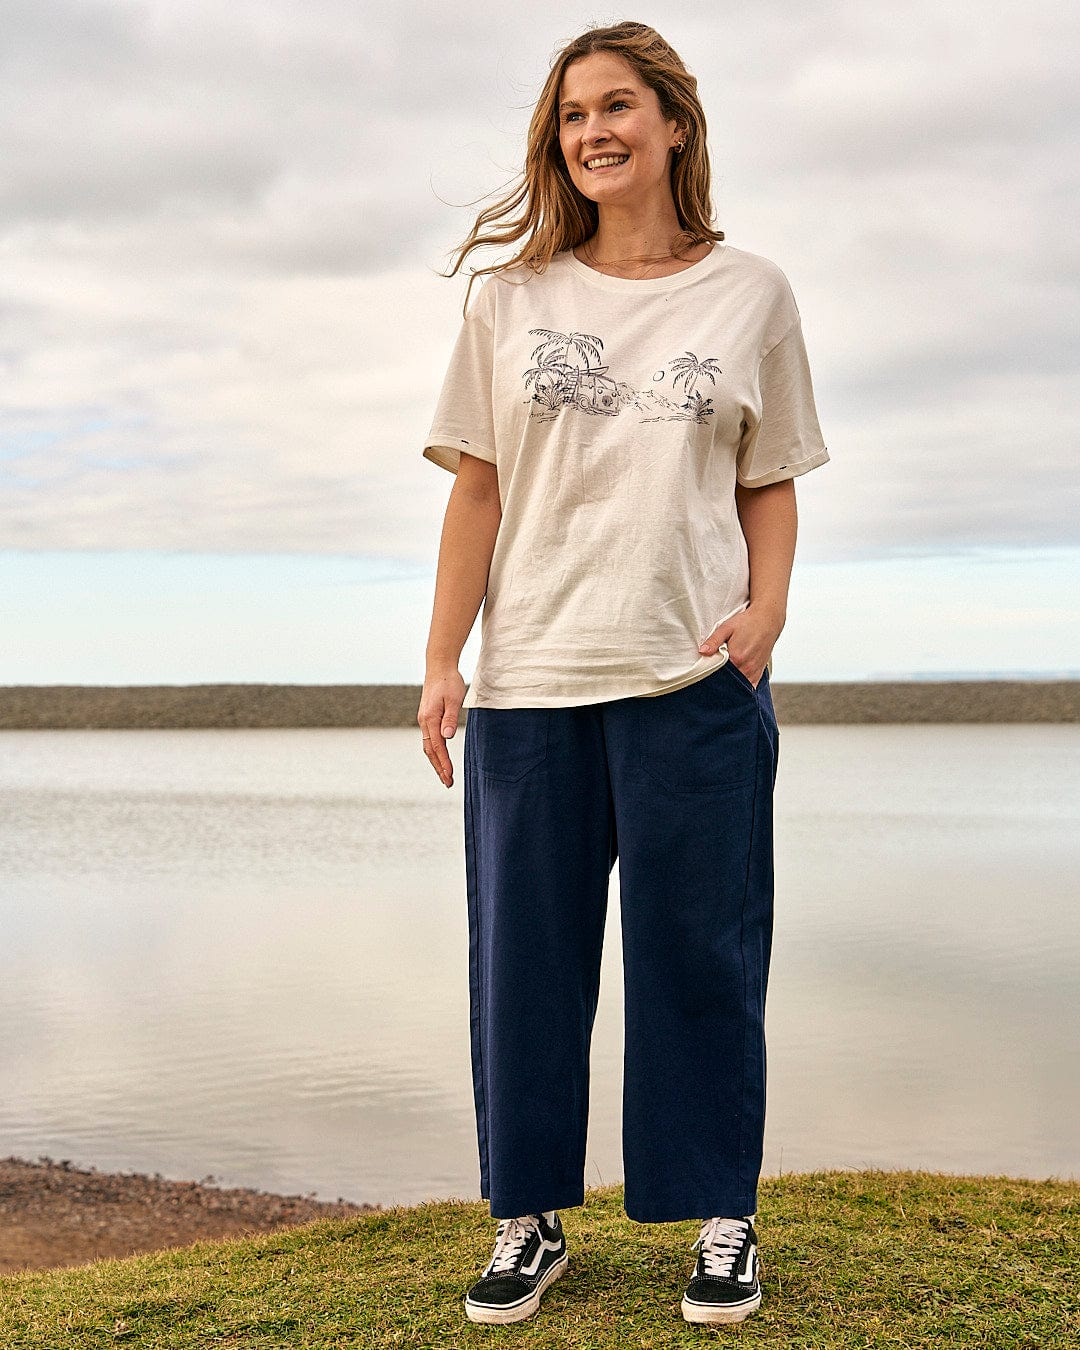 A woman is standing in front of a body of water wearing Saltrock's Hilda - Womens Canvas Trouser - Dark Blue t-shirt.